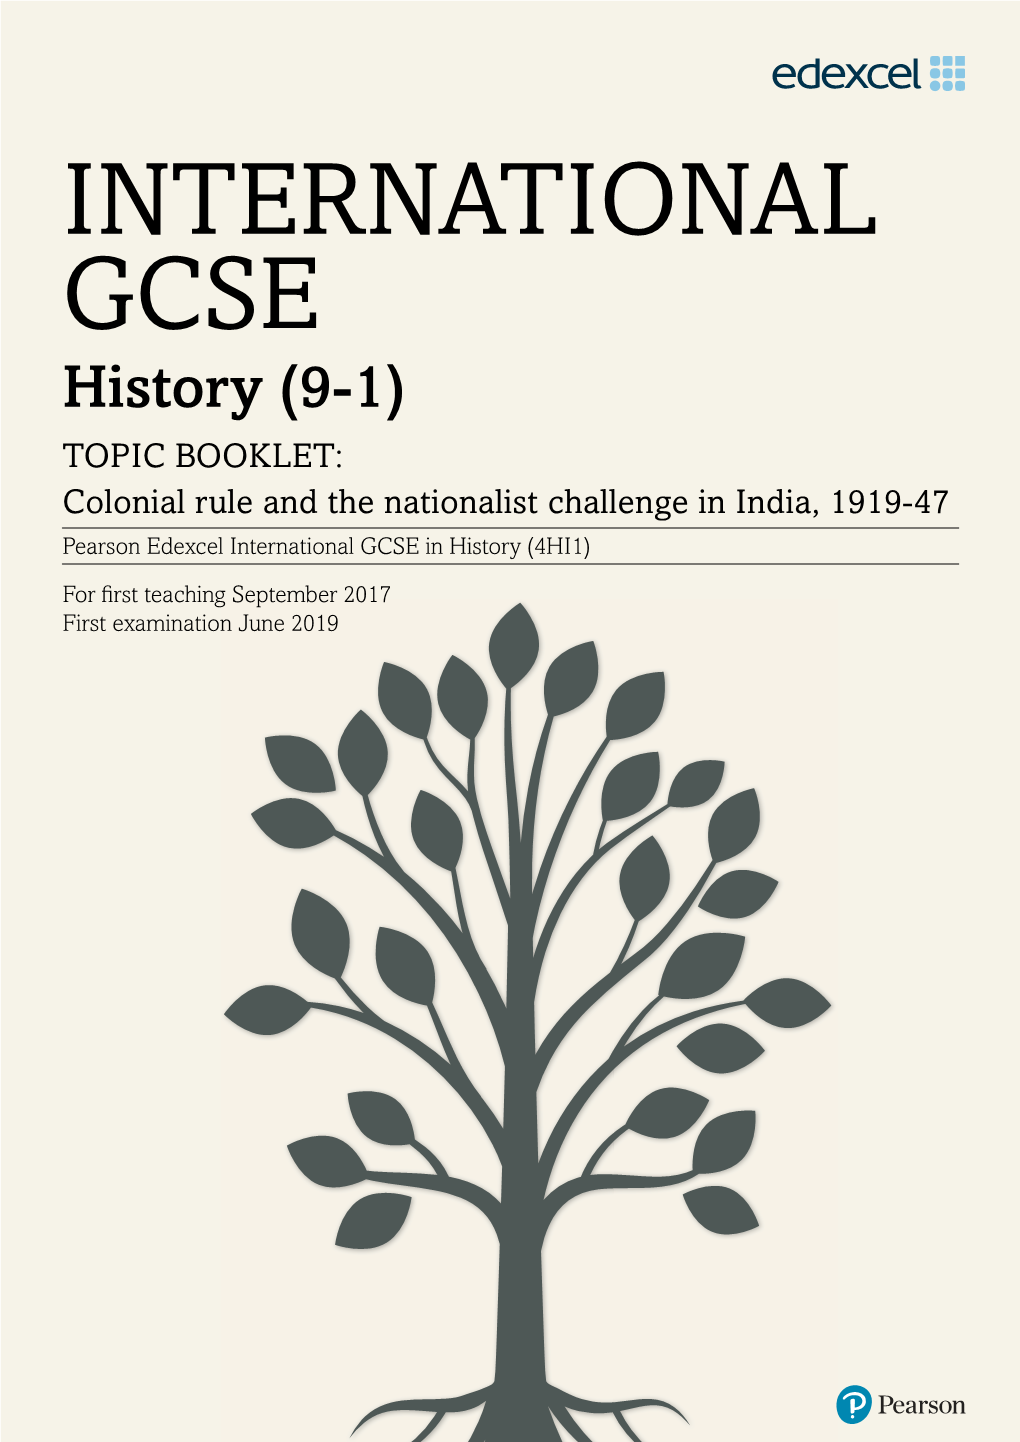 INTERNATIONAL GCSE History (9-1) TOPIC BOOKLET: Colonial Rule and the Nationalist Challenge in India, 1919-47 Pearson Edexcel International GCSE in History (4HI1)